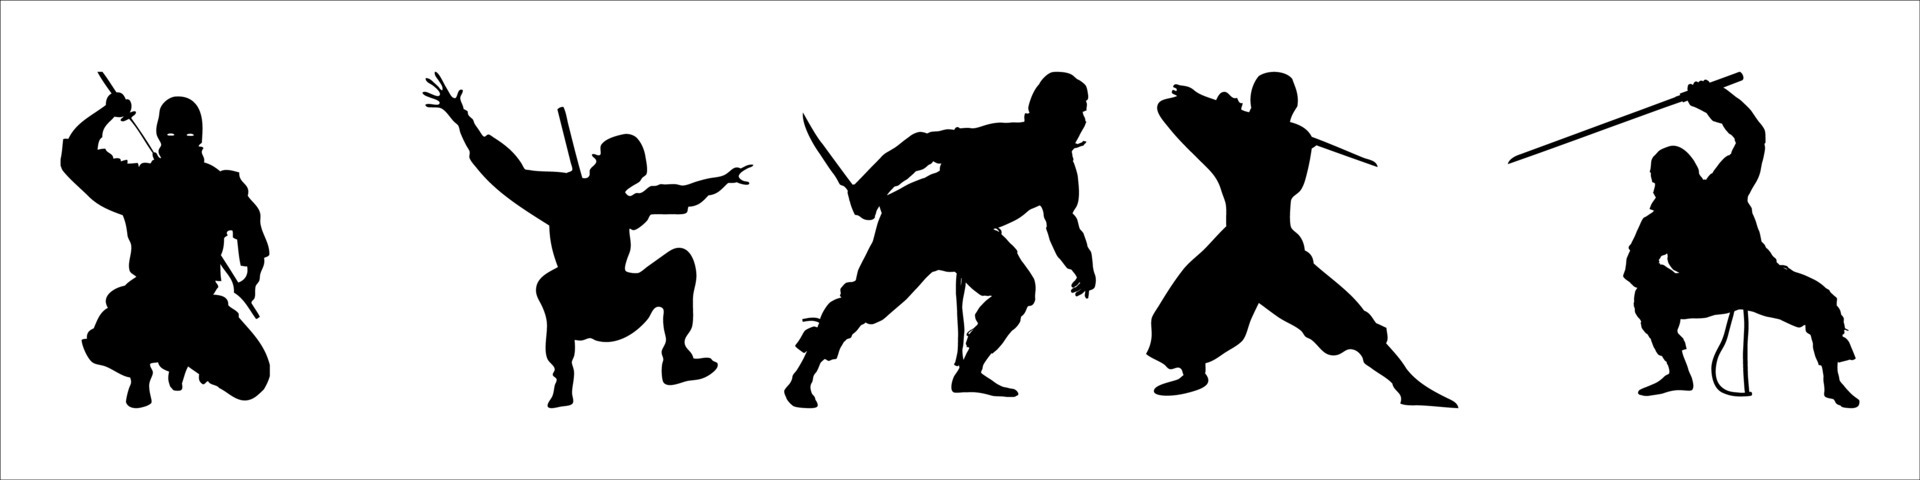 Ninja Silhouette Vector Art, Icon, and Graphics for Free Download